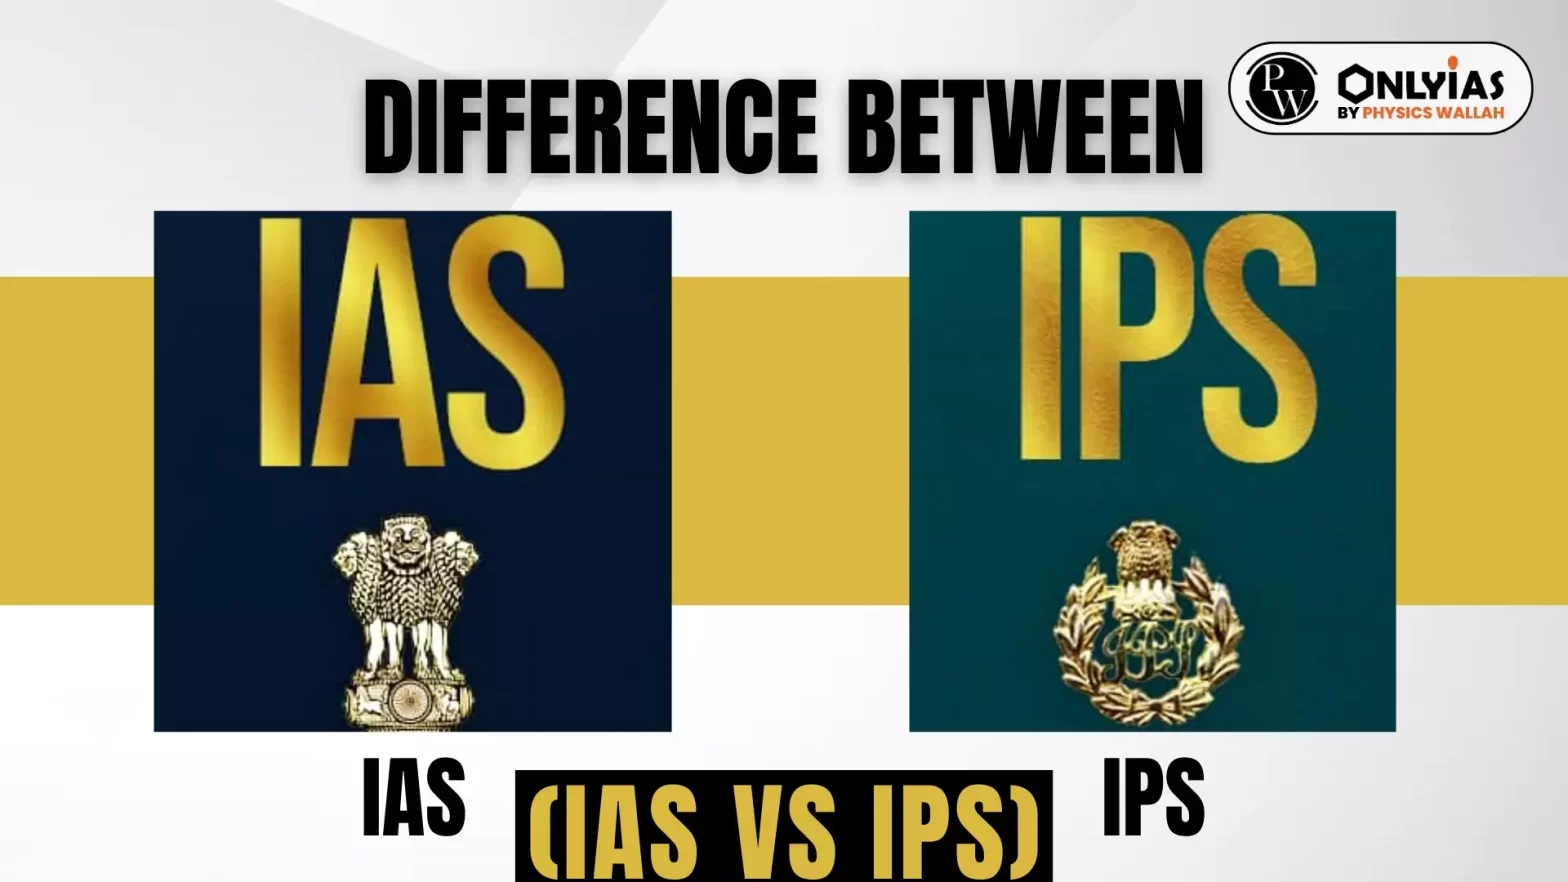 Difference between IAS and IPS (IAS vs IPS)